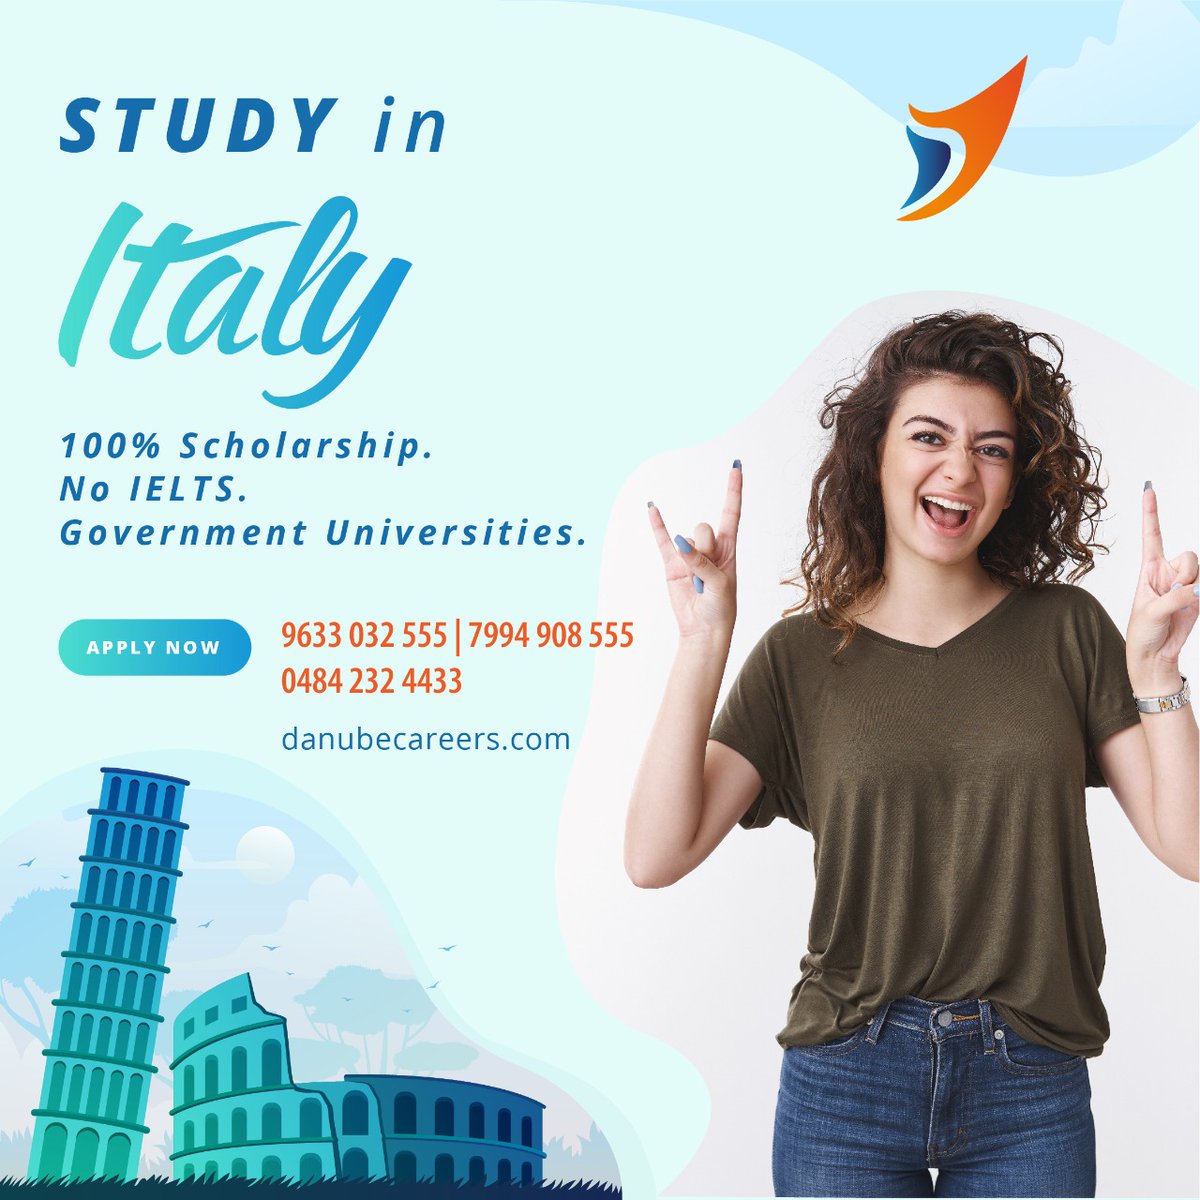 Study Free in Italy
Work in Europe

#Scholarship #applynow #studyingabroad #workandstudy #allsubjects #discount #noielts #lowertuitionfees #studyinitaly🇮🇹 #italyvisa #freeeducation #notuition